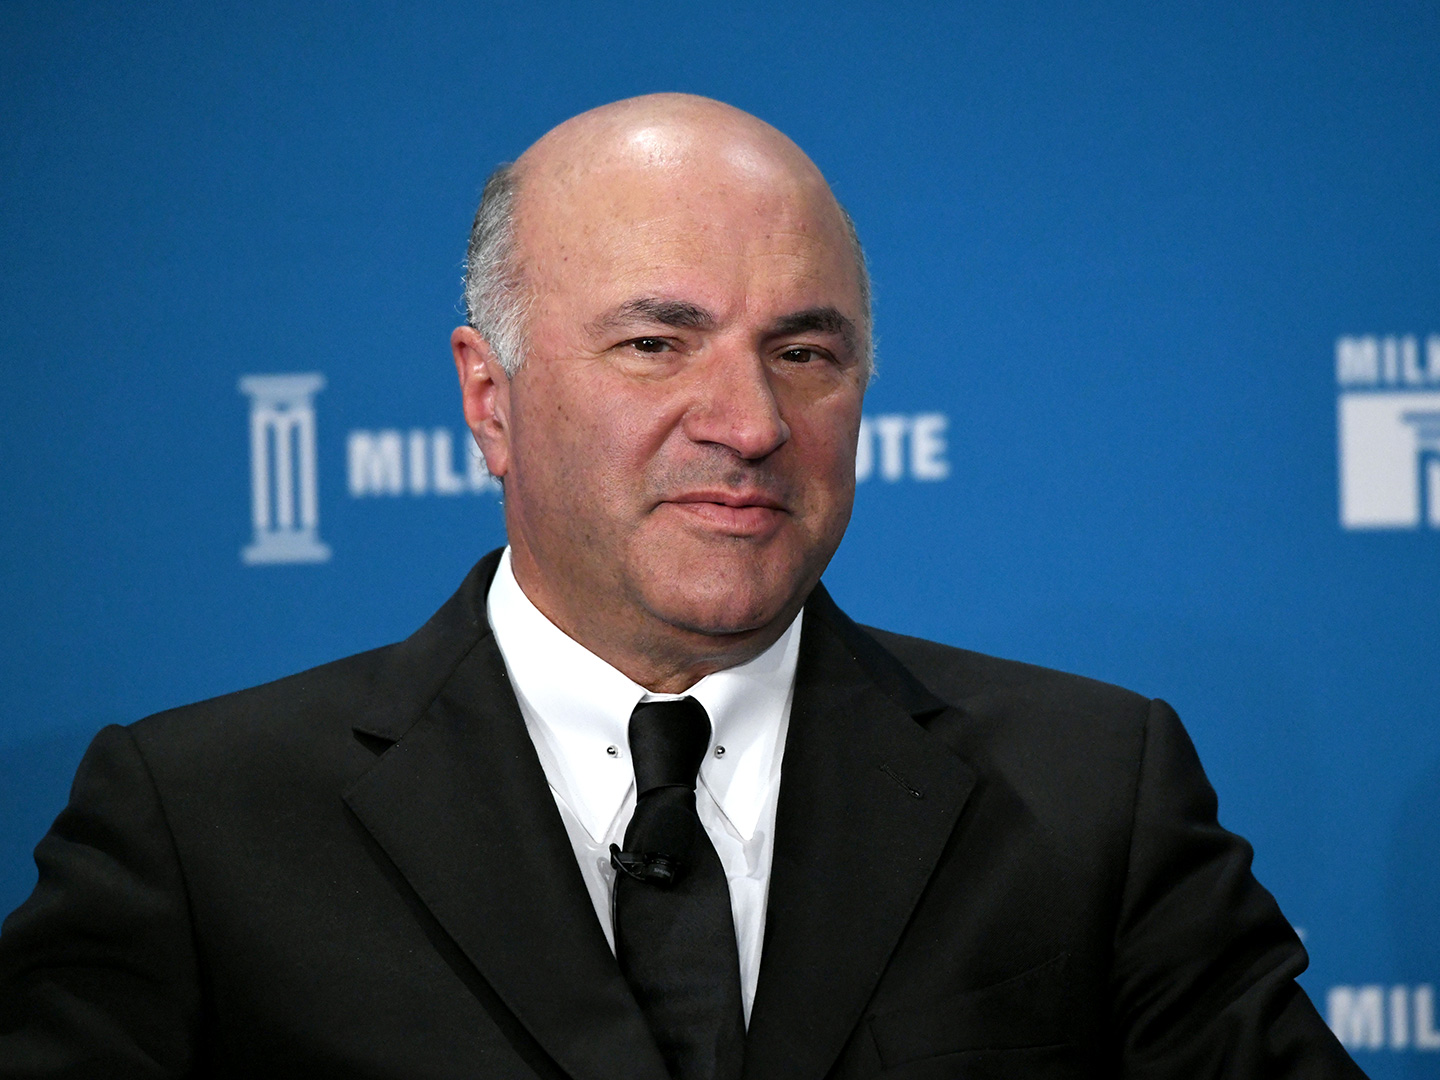 Kevin O’Leary Says Gensler's Comments Killed His Attempts to Help Save FTX